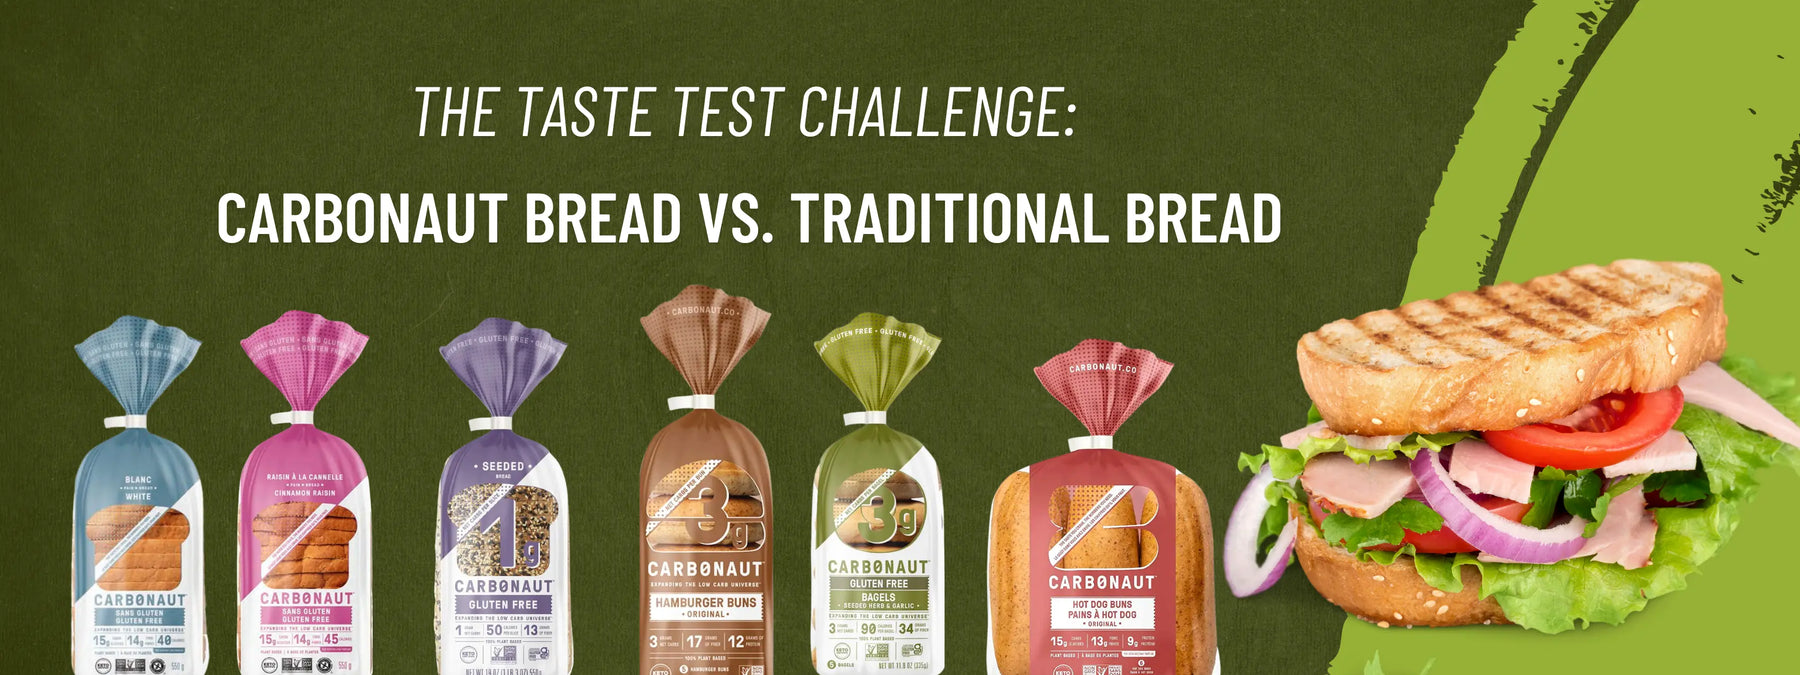 The Taste Test Challenge: Carbonaut Bread vs. Traditional Bread